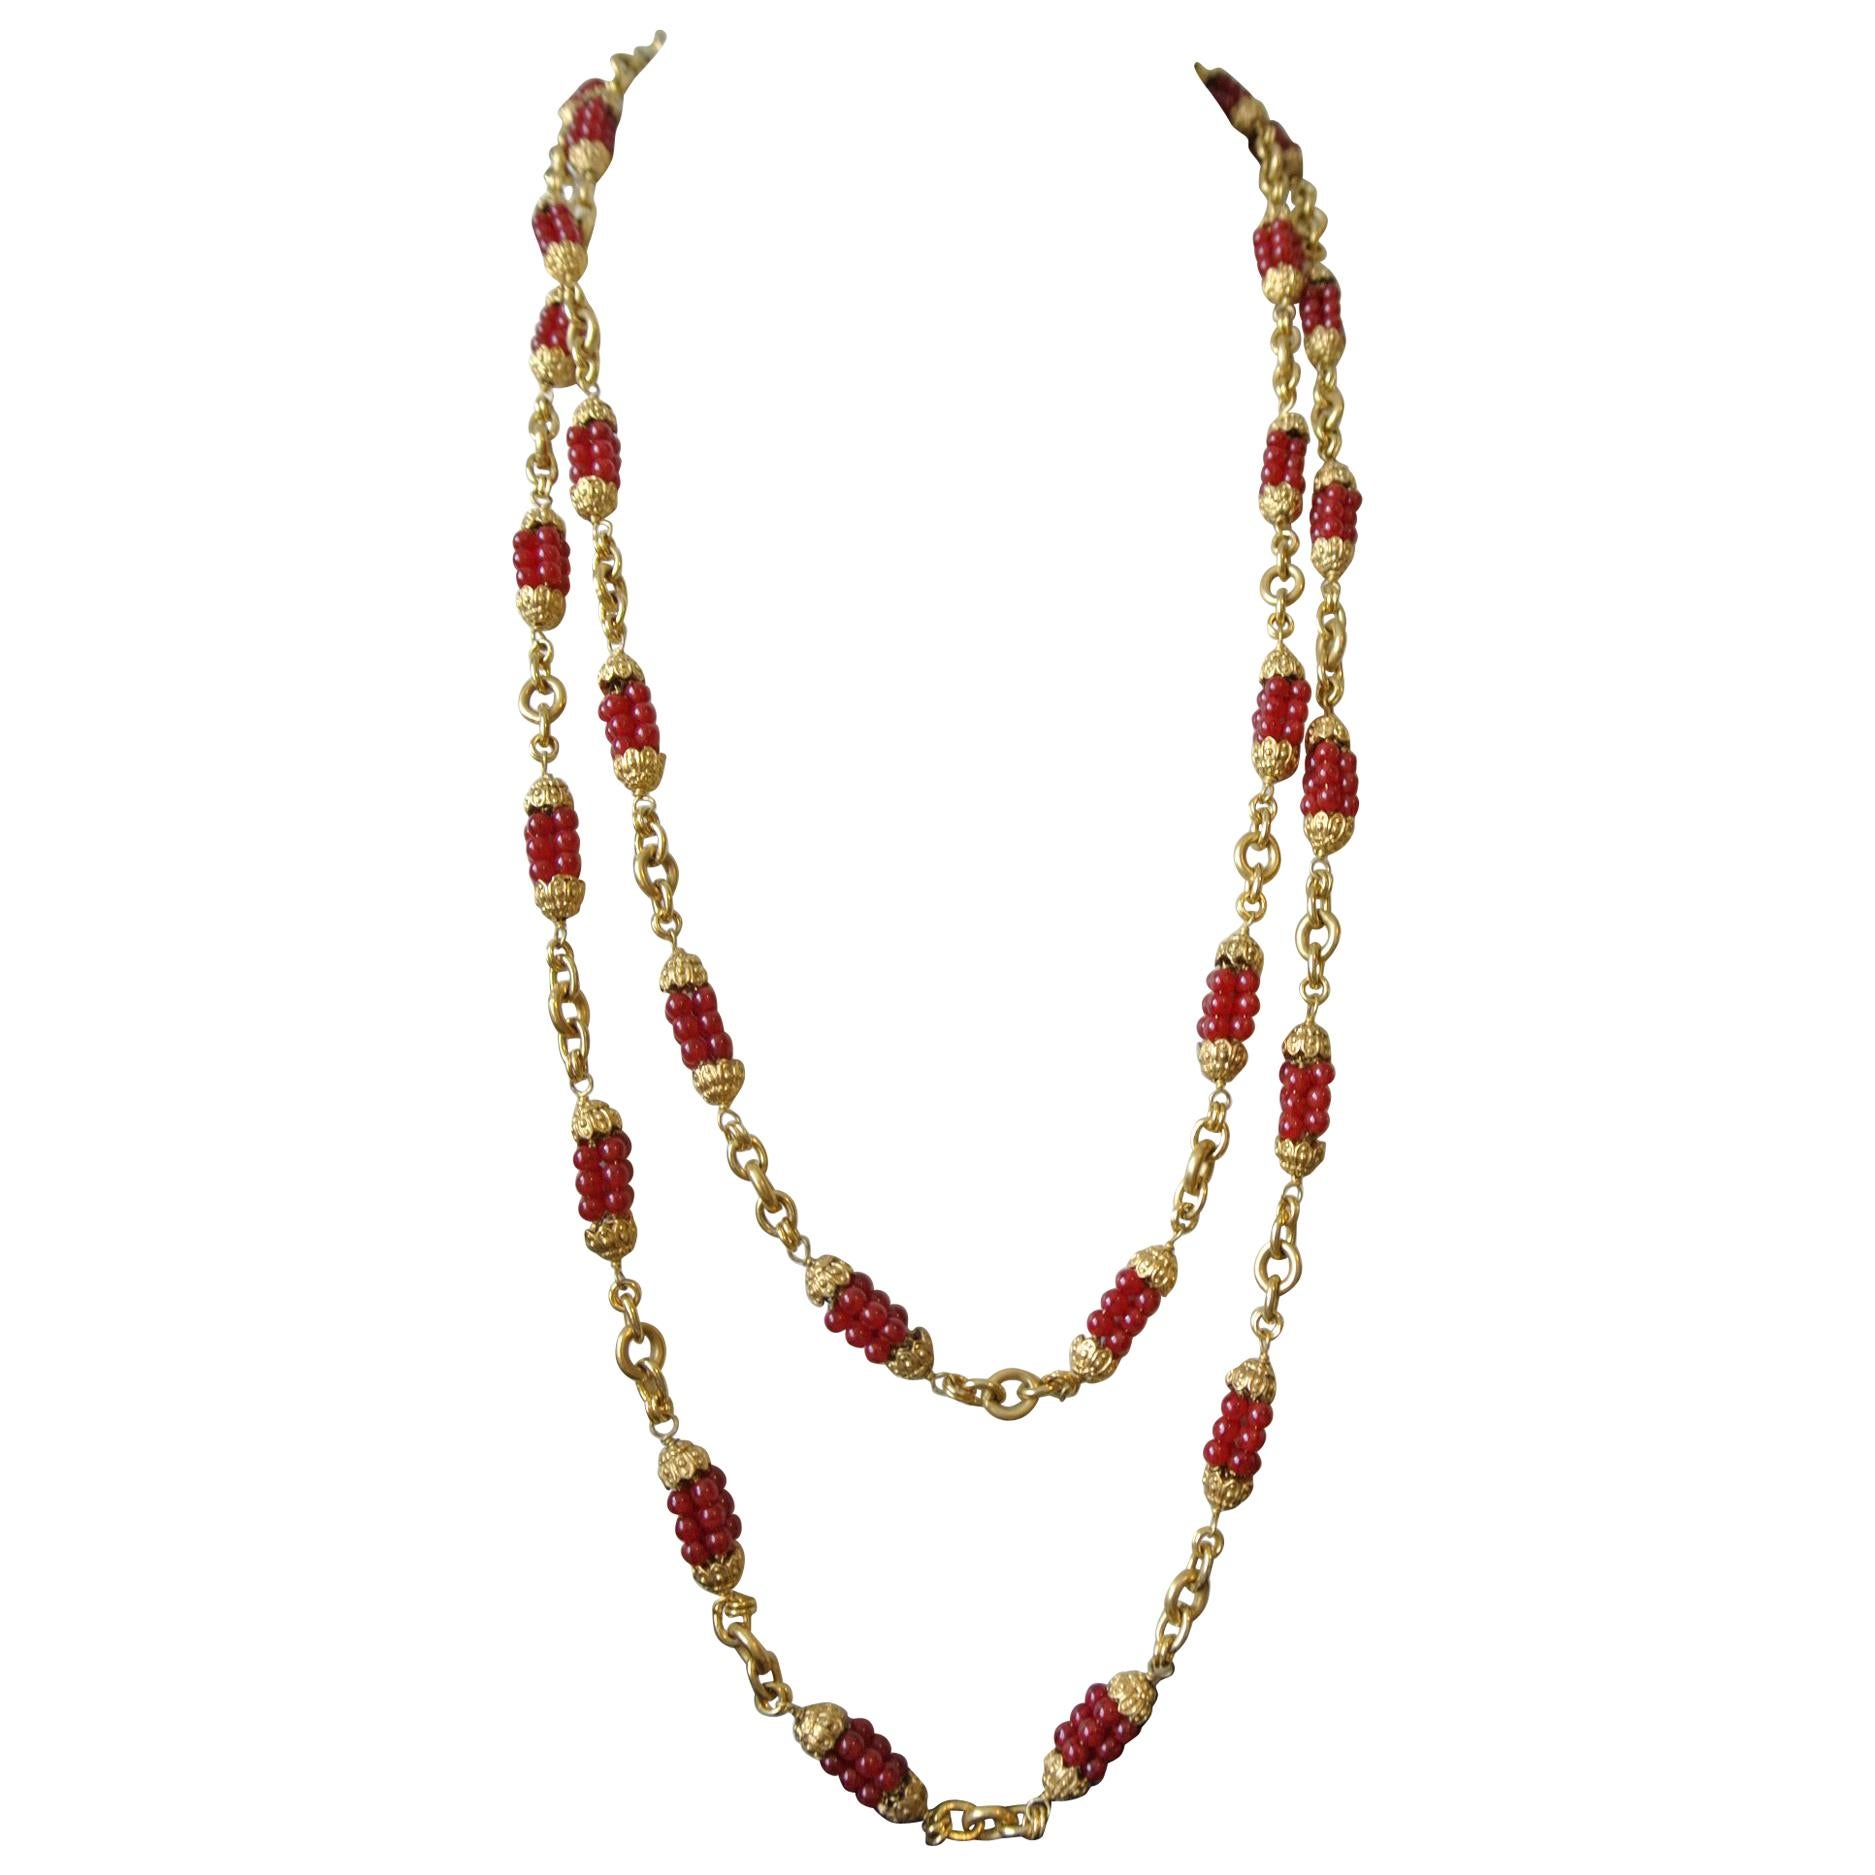 Chanel 1960s by Goossens Red Gripoix Beads Filigree Sautoir Necklace For Sale